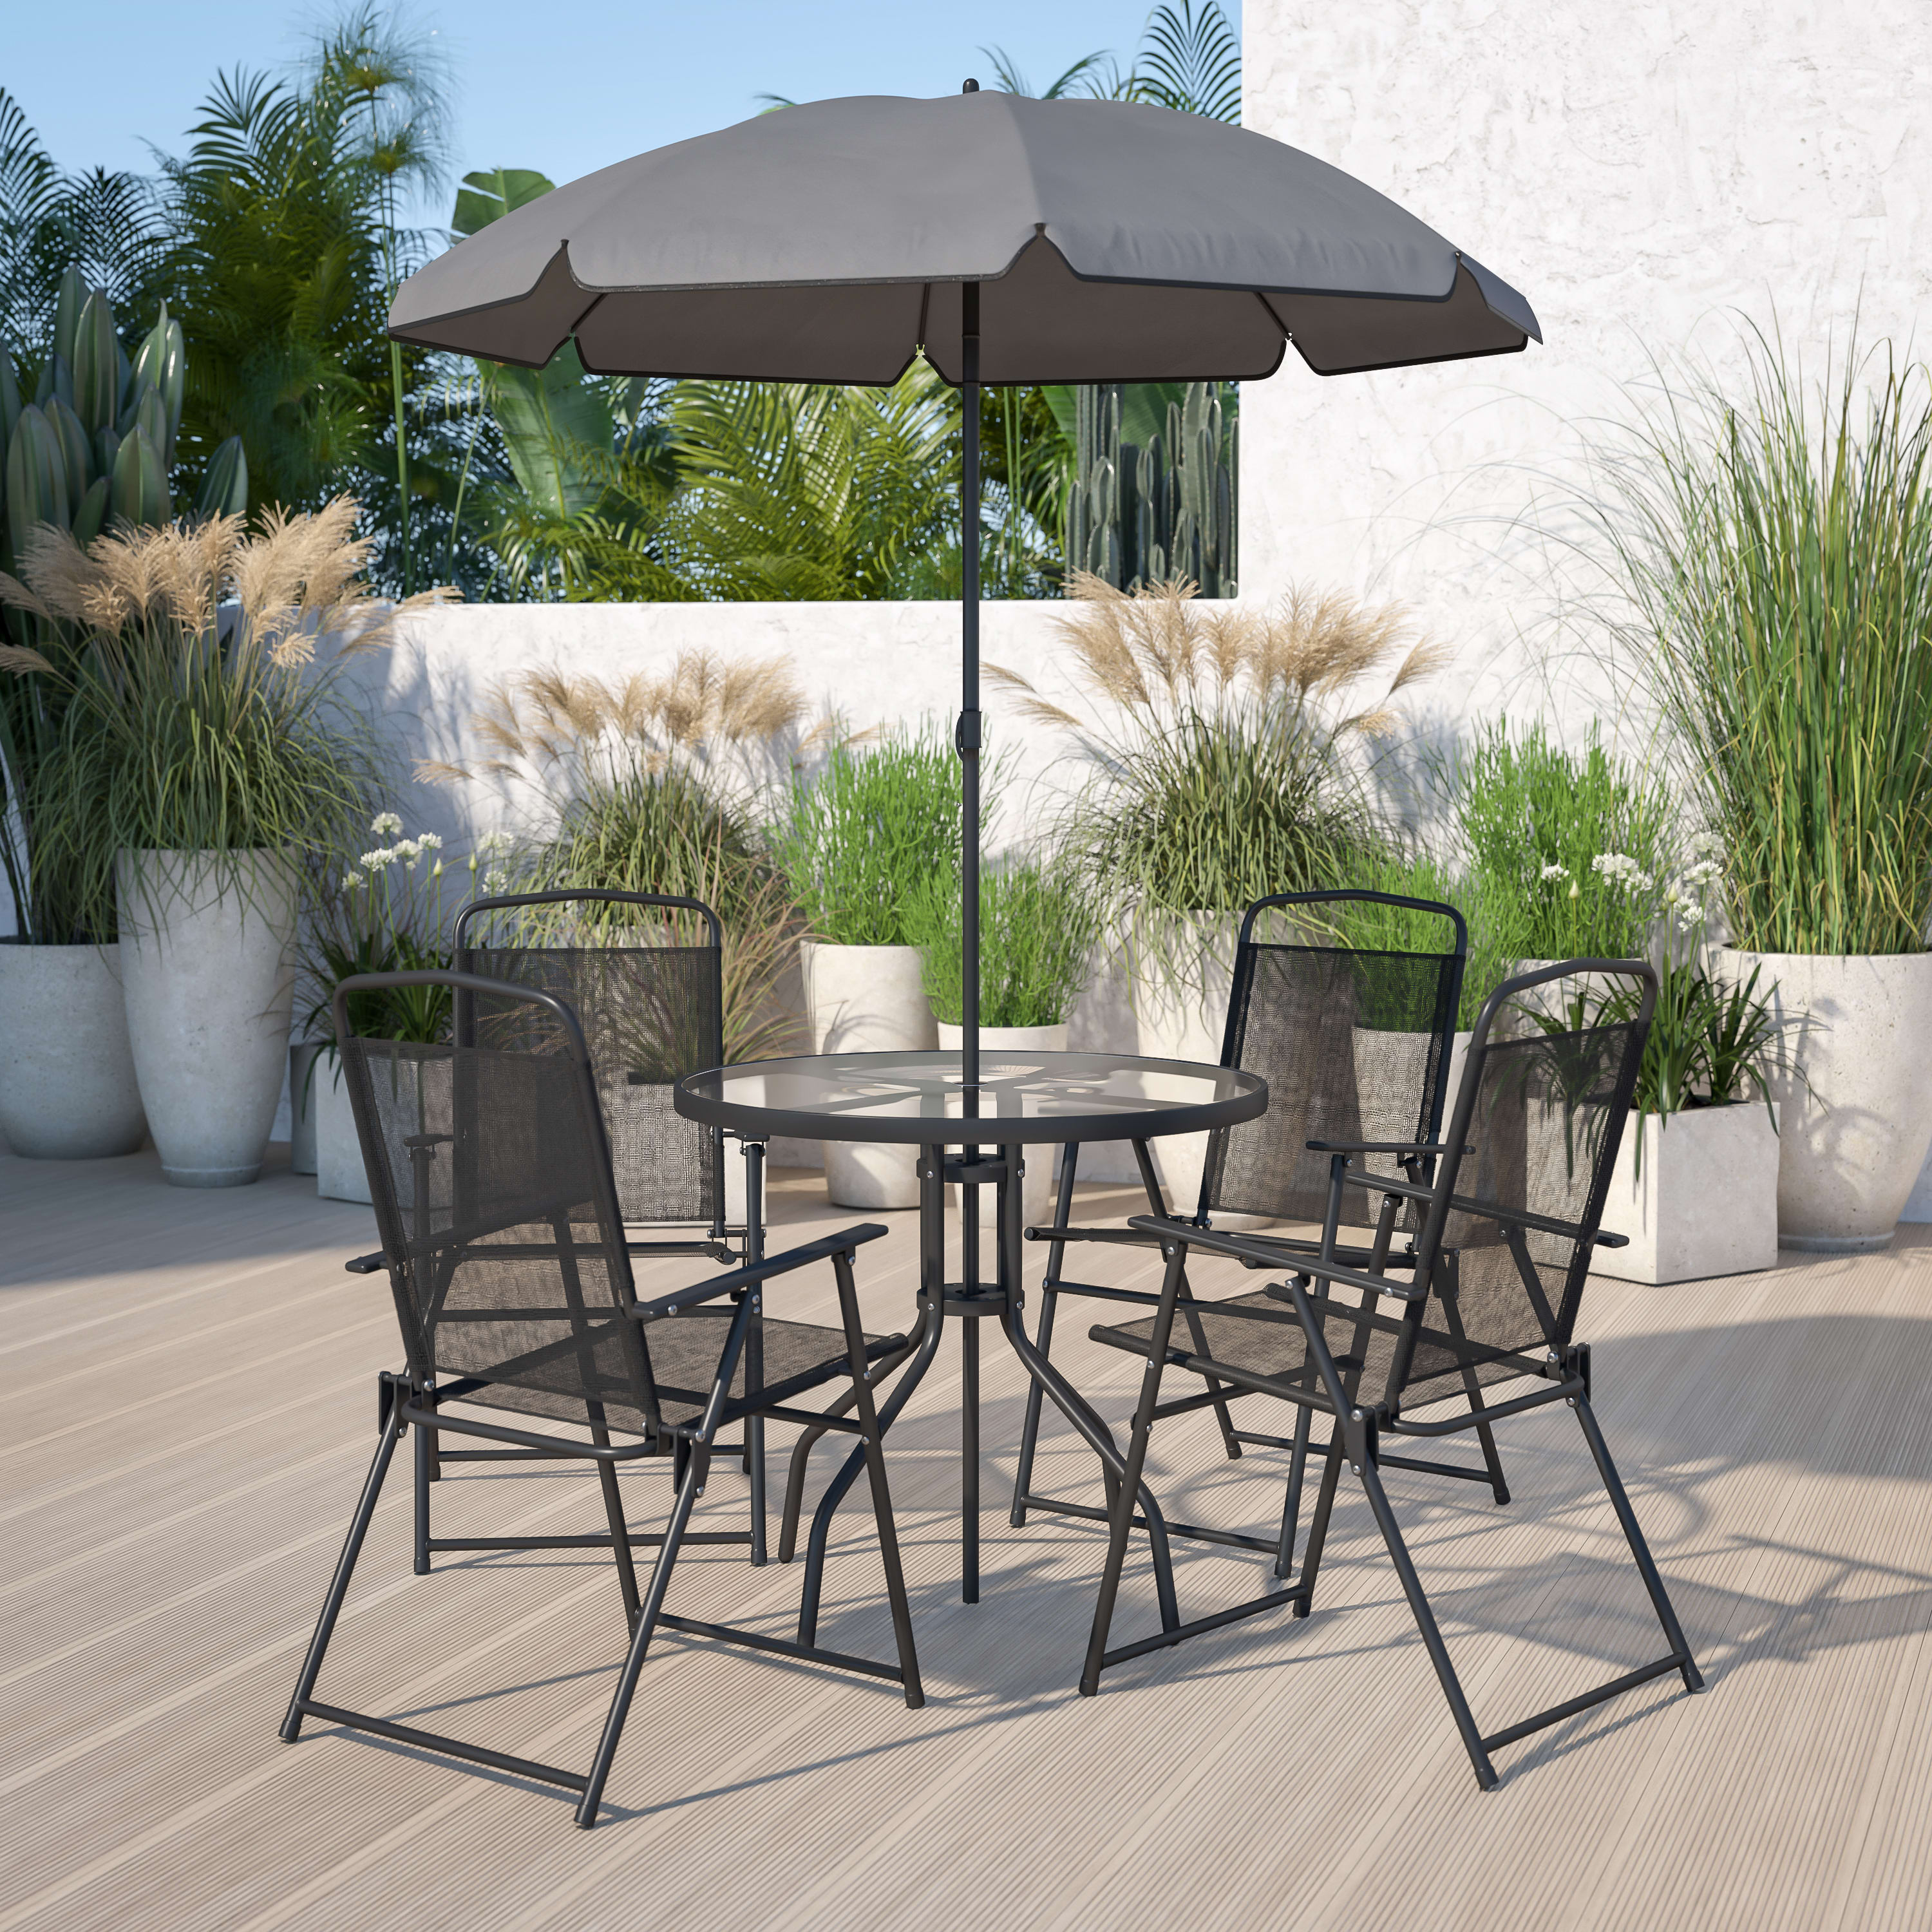 Flash Furniture Nantucket 6-Piece Patio Set with Glass Table, Umbrella, and 4 Folding Chairs, Black - image 1 of 16